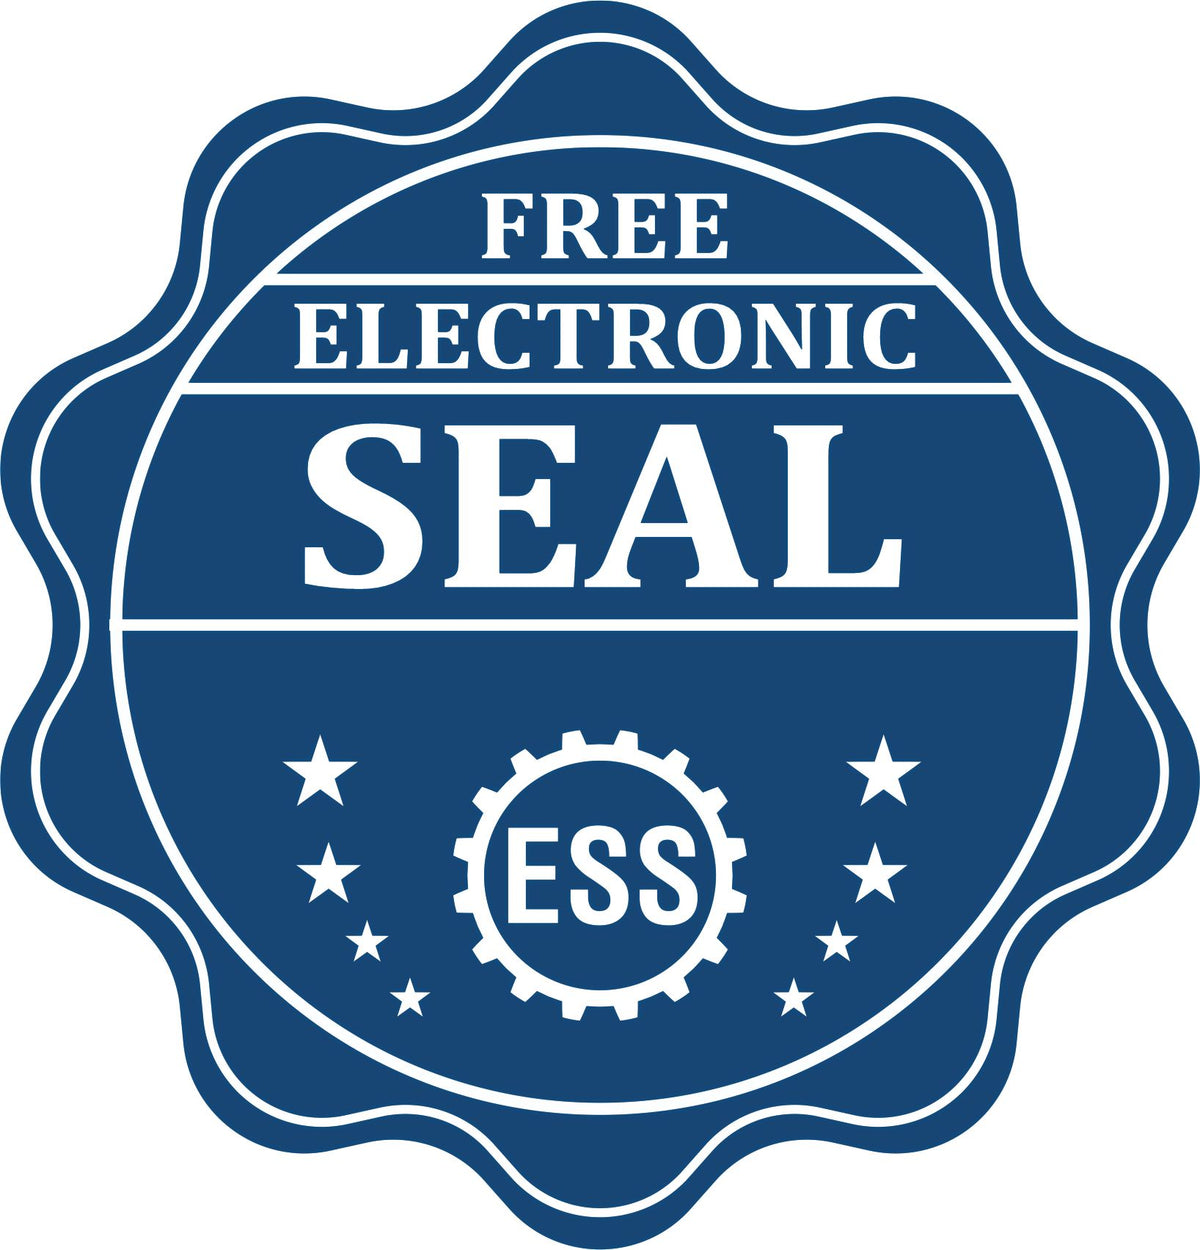 A badge showing a free electronic seal for the Soft Pocket South Dakota Landscape Architect Embosser with stars and the ESS gear on the emblem.